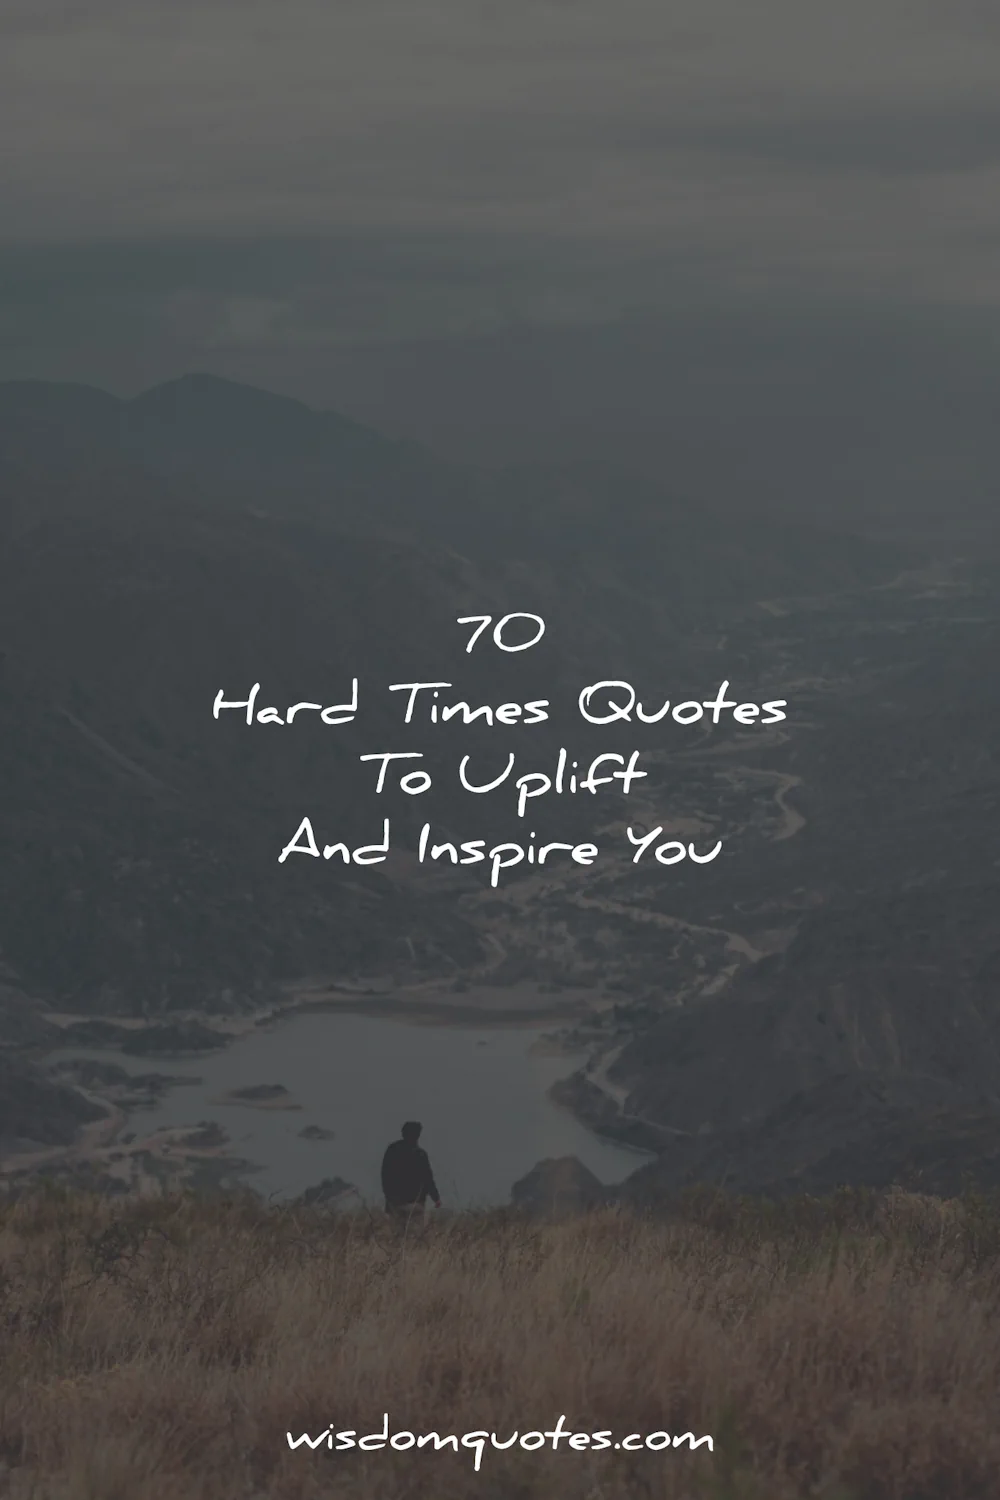 hard times quotes wisdom